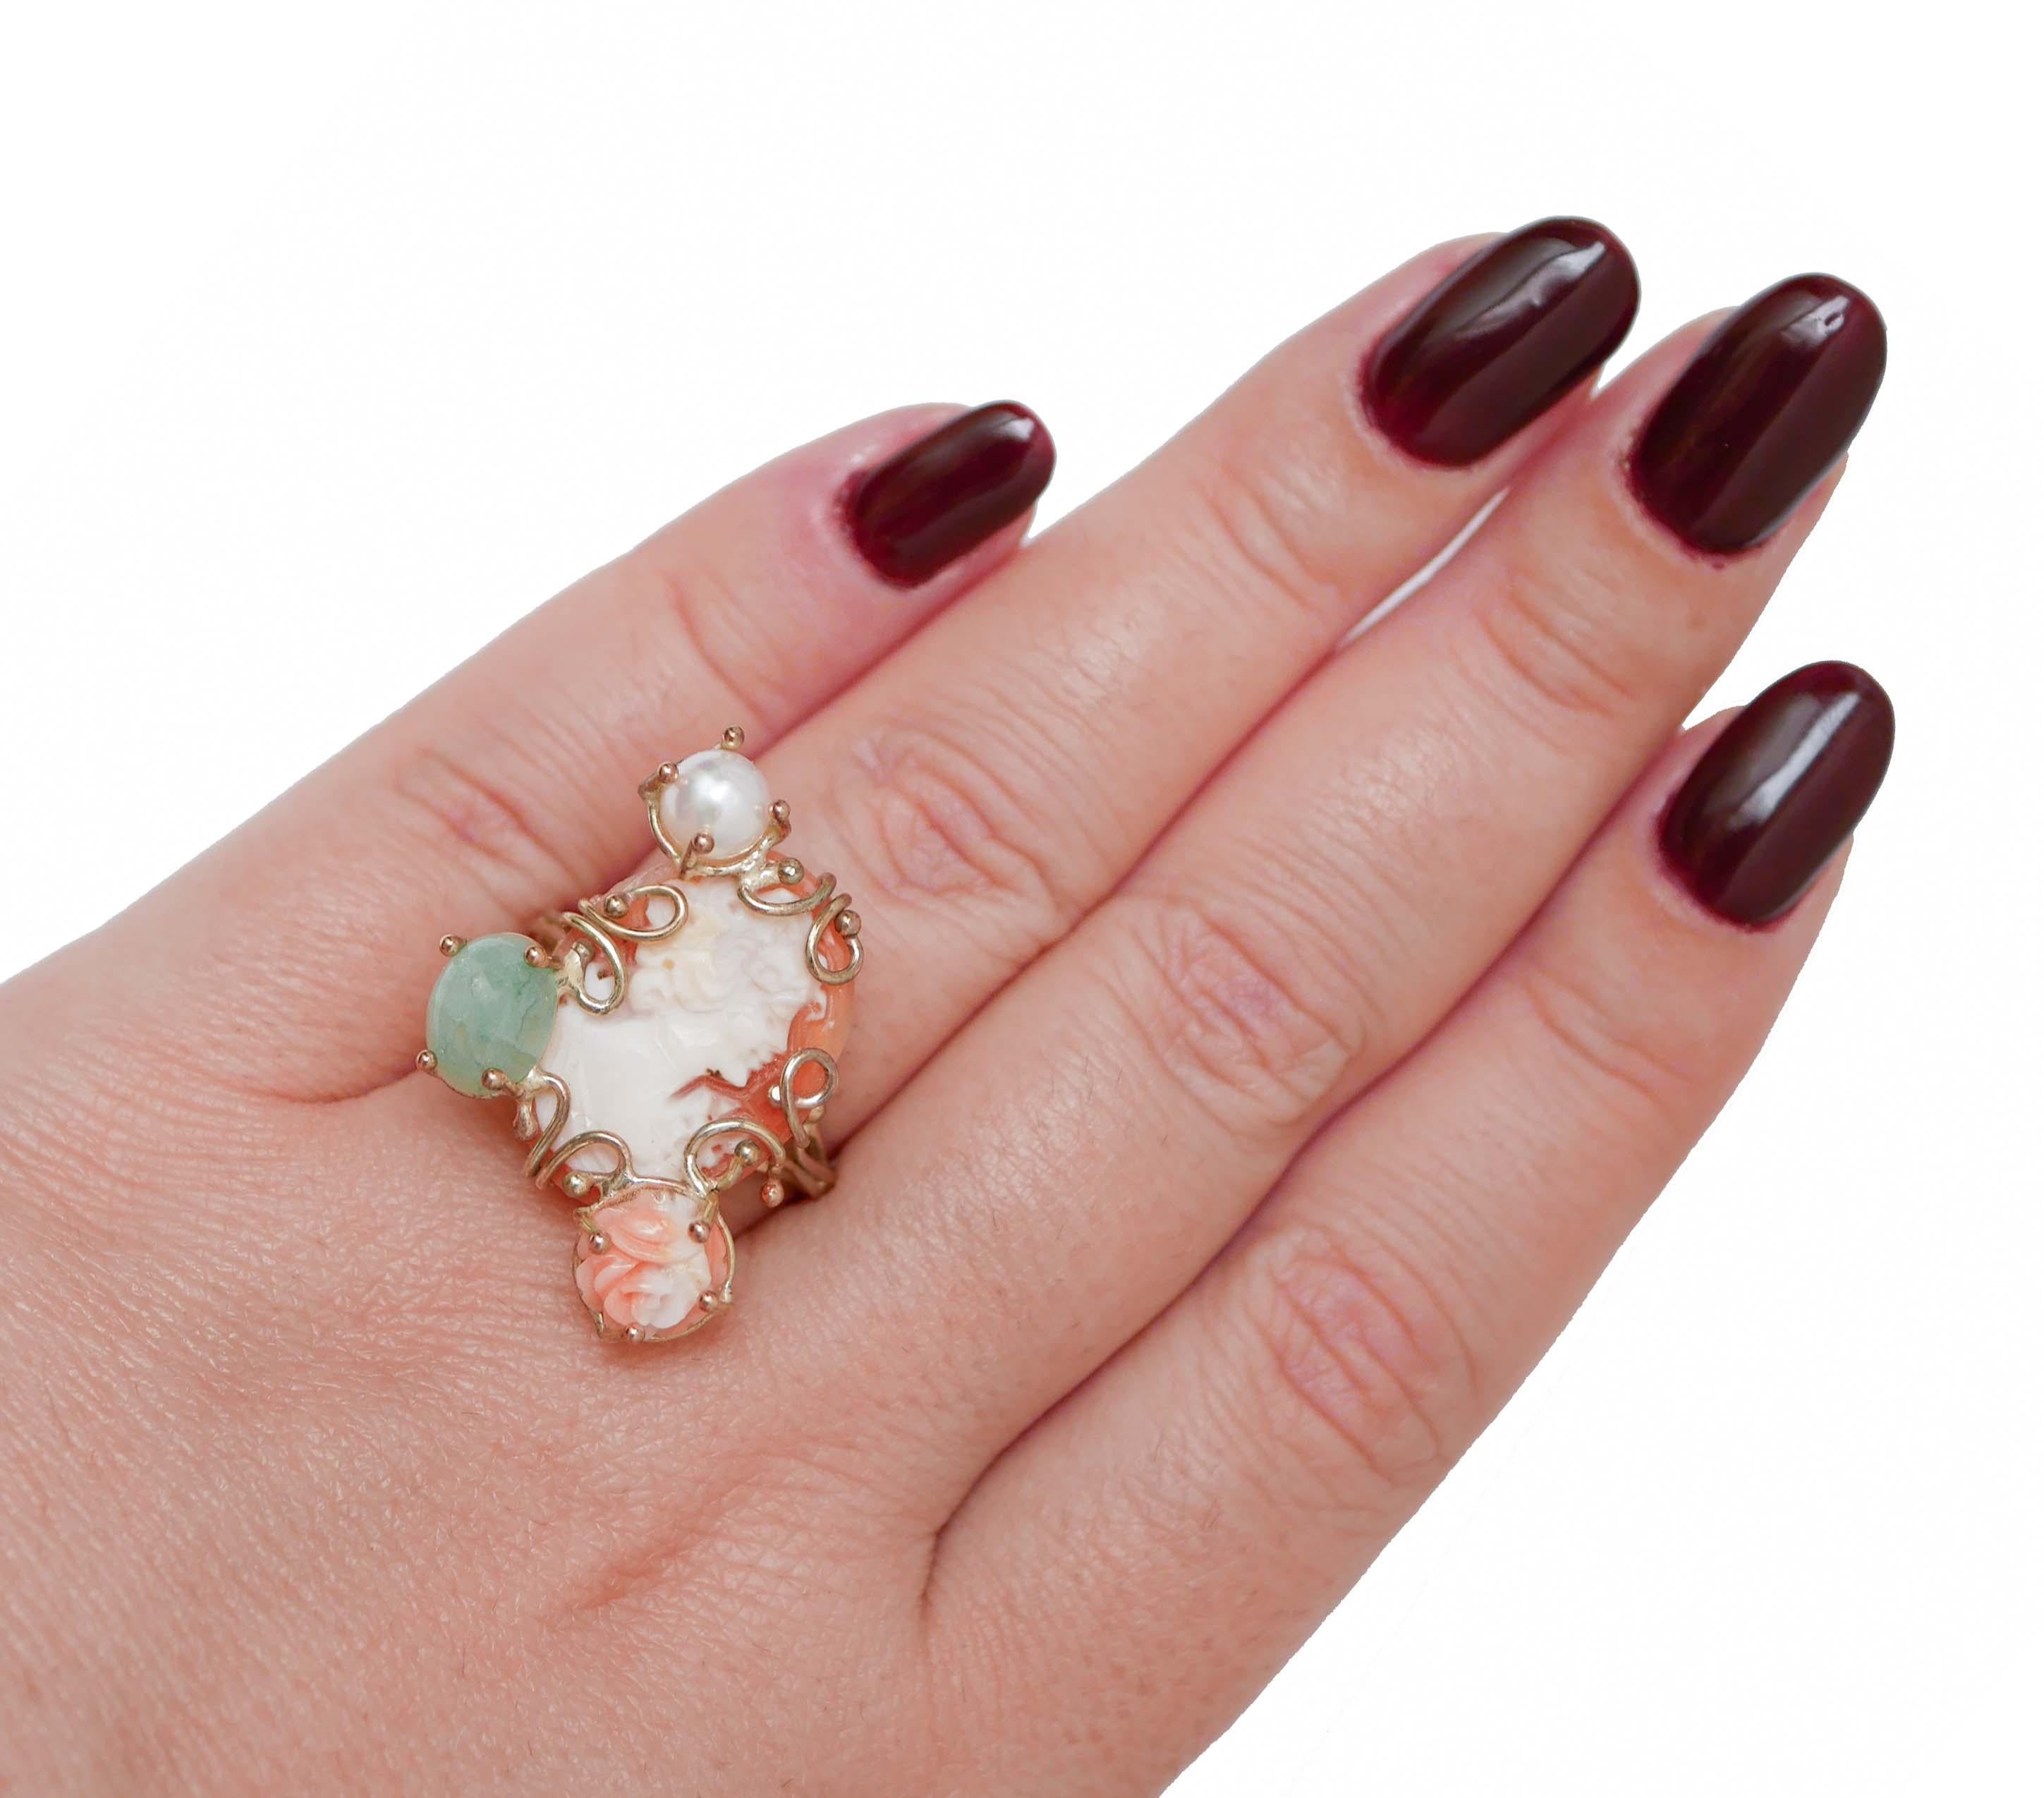 Kamee, Perle, Steine, Rose Gold Ring im Zustand „Gut“ im Angebot in Marcianise, Marcianise (CE)